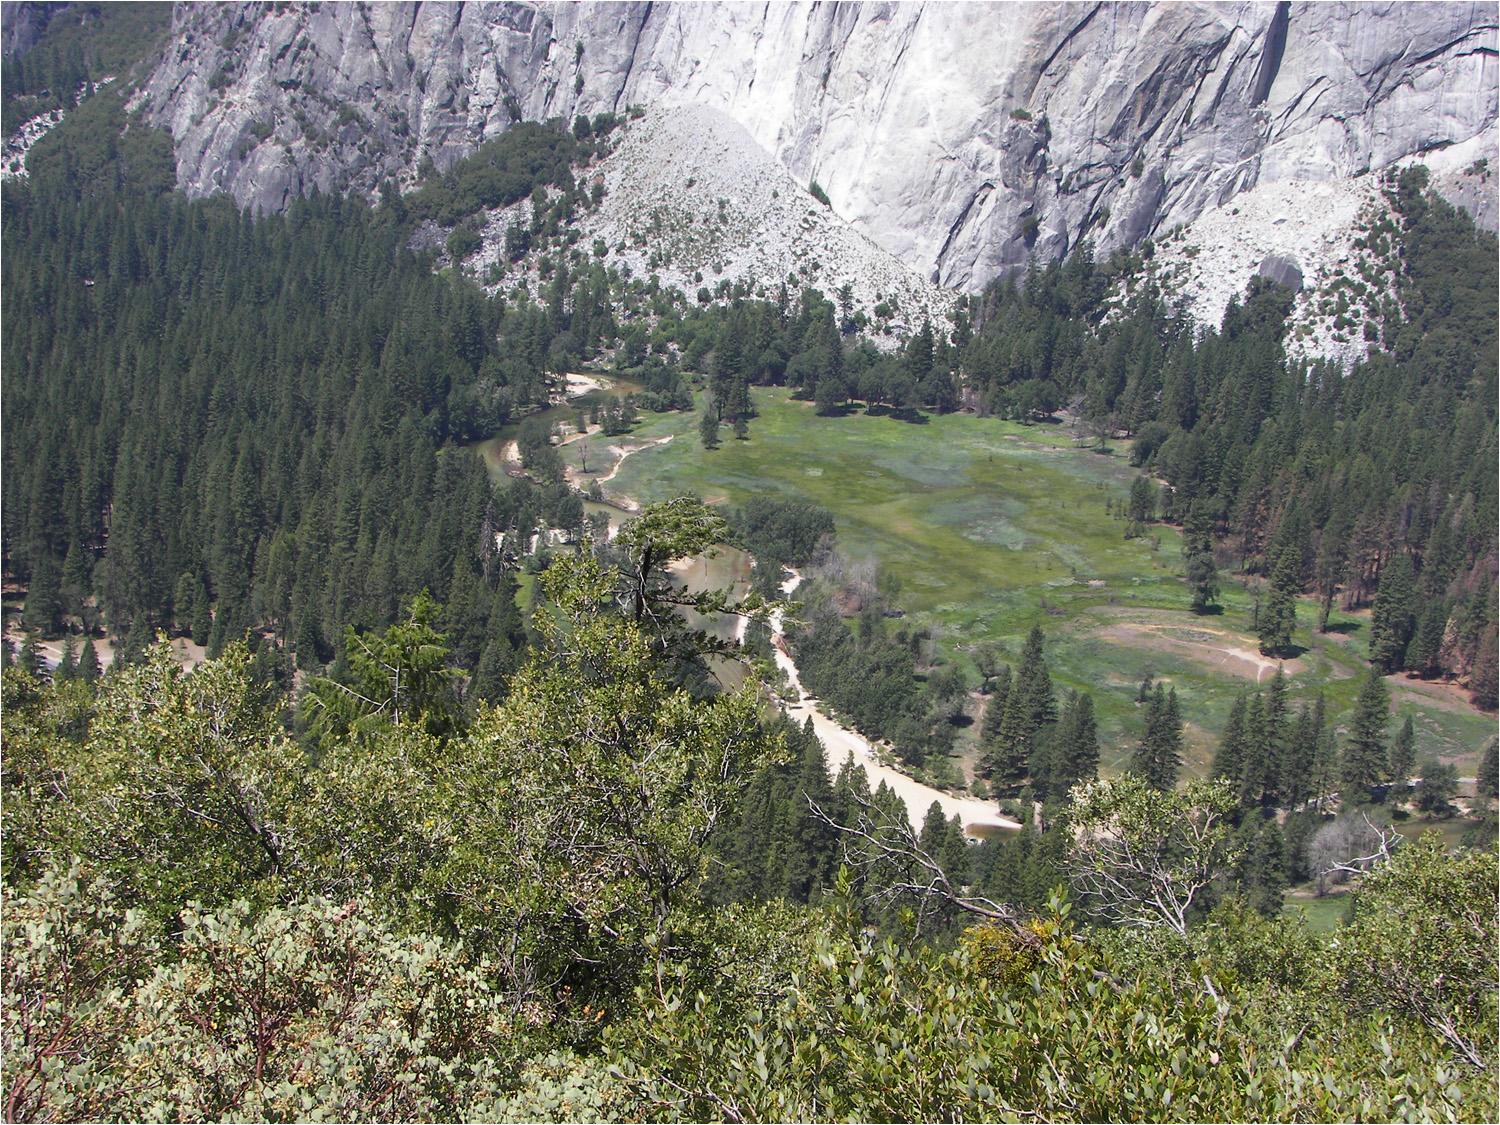 Glacier Point Hike-View of valley